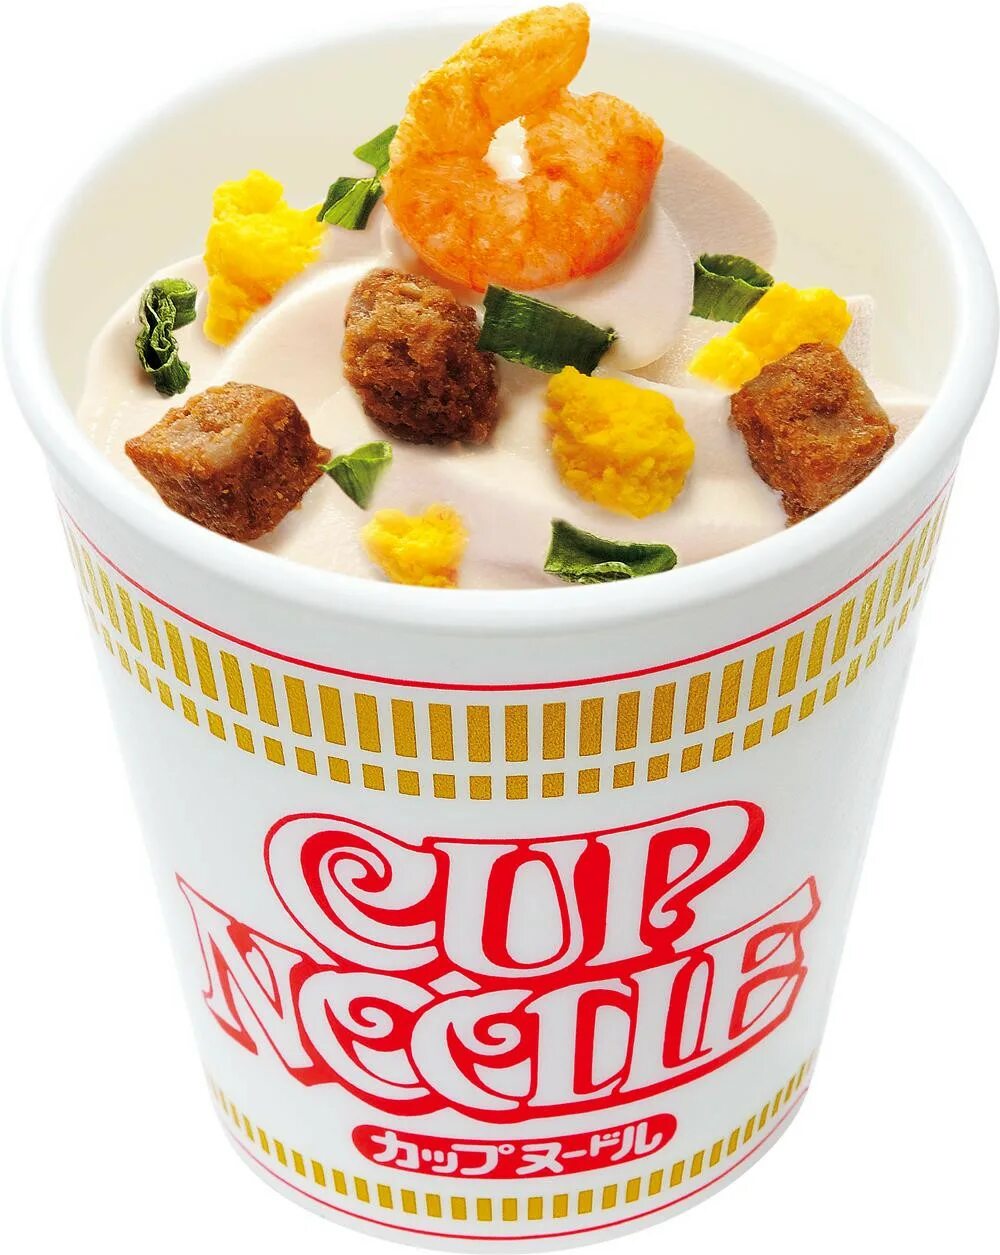 Cup лапша. Лапша Cup. Лапша в чашке. Noodles in a Cup. Candy Noodle Cup мармелад.